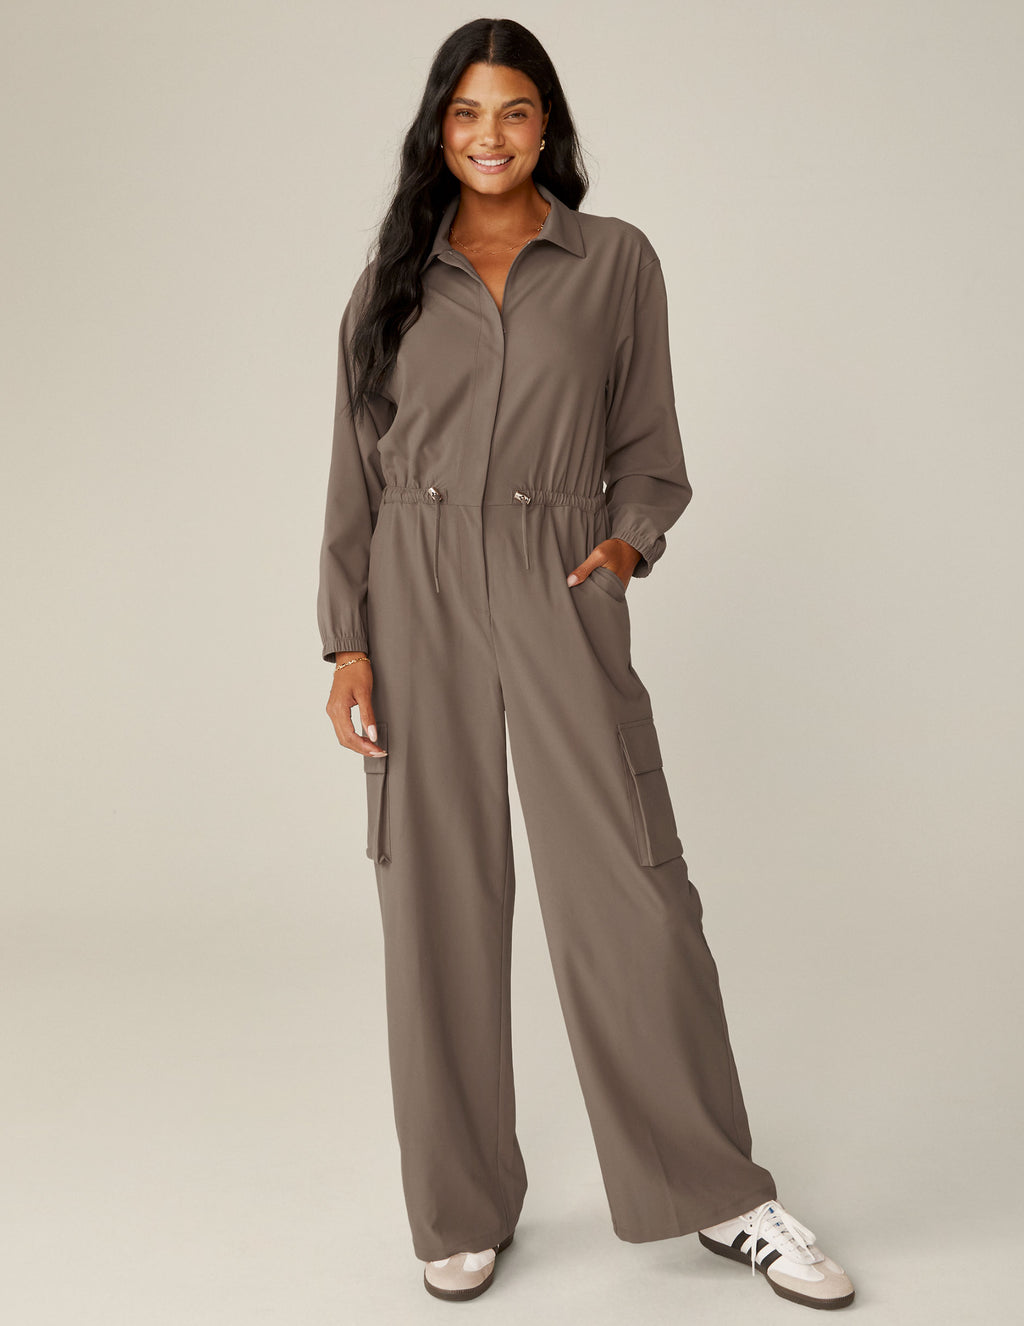 City Chic Jumpsuit Featured Image